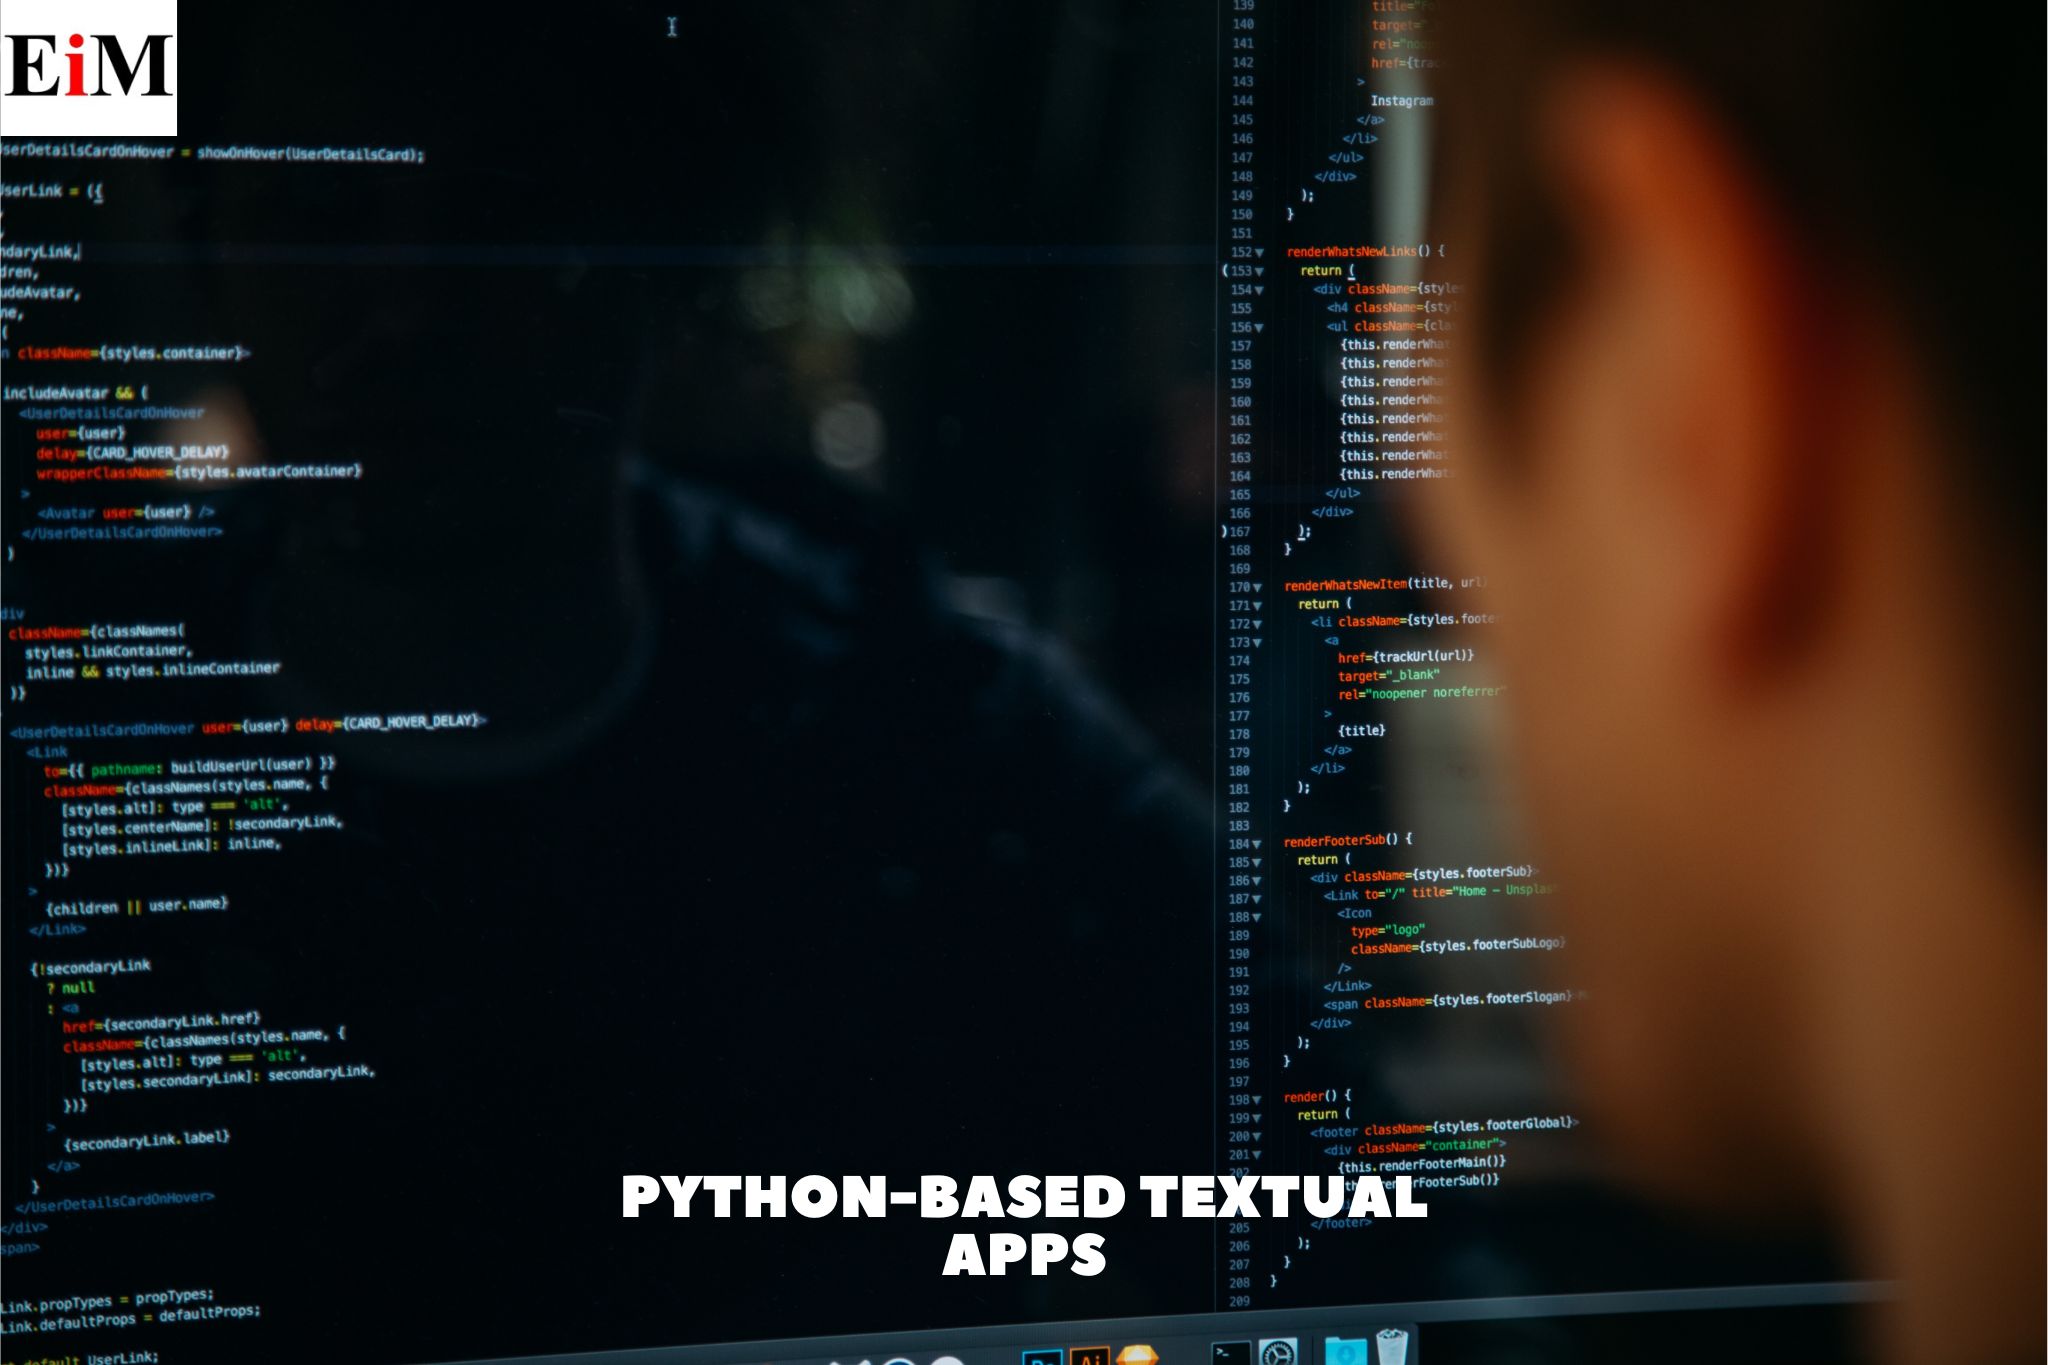 Python-based Textual Apps are Coming to the Web